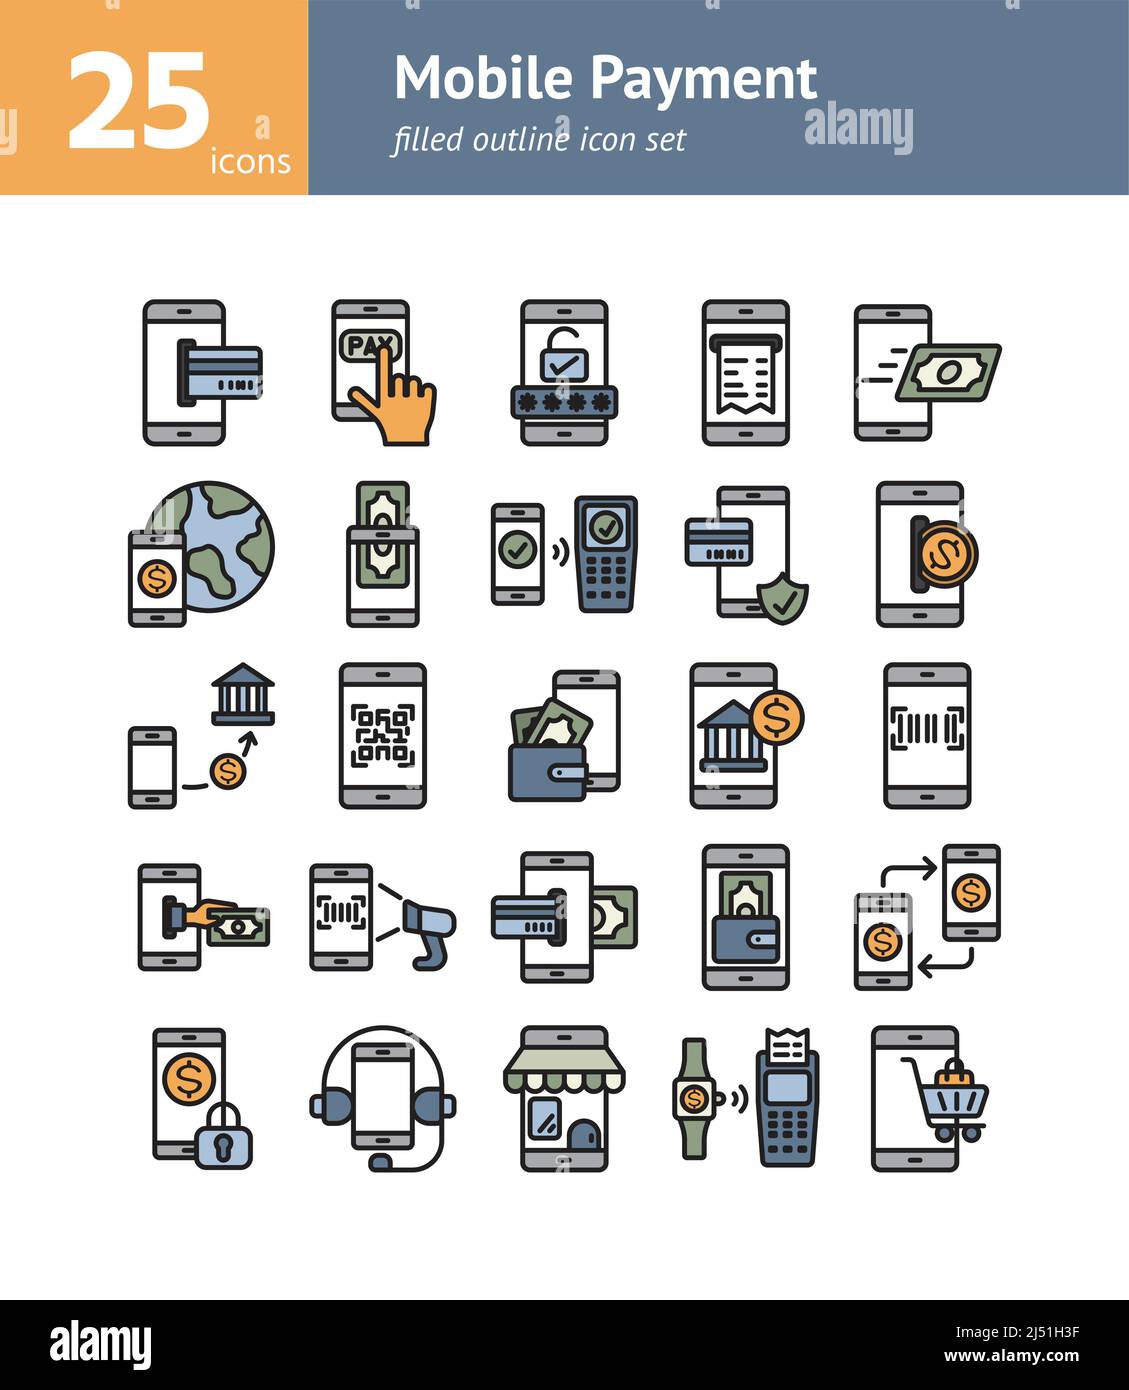 Mobile Payment filled outline icon set. Vector and Illustration. Stock Vector